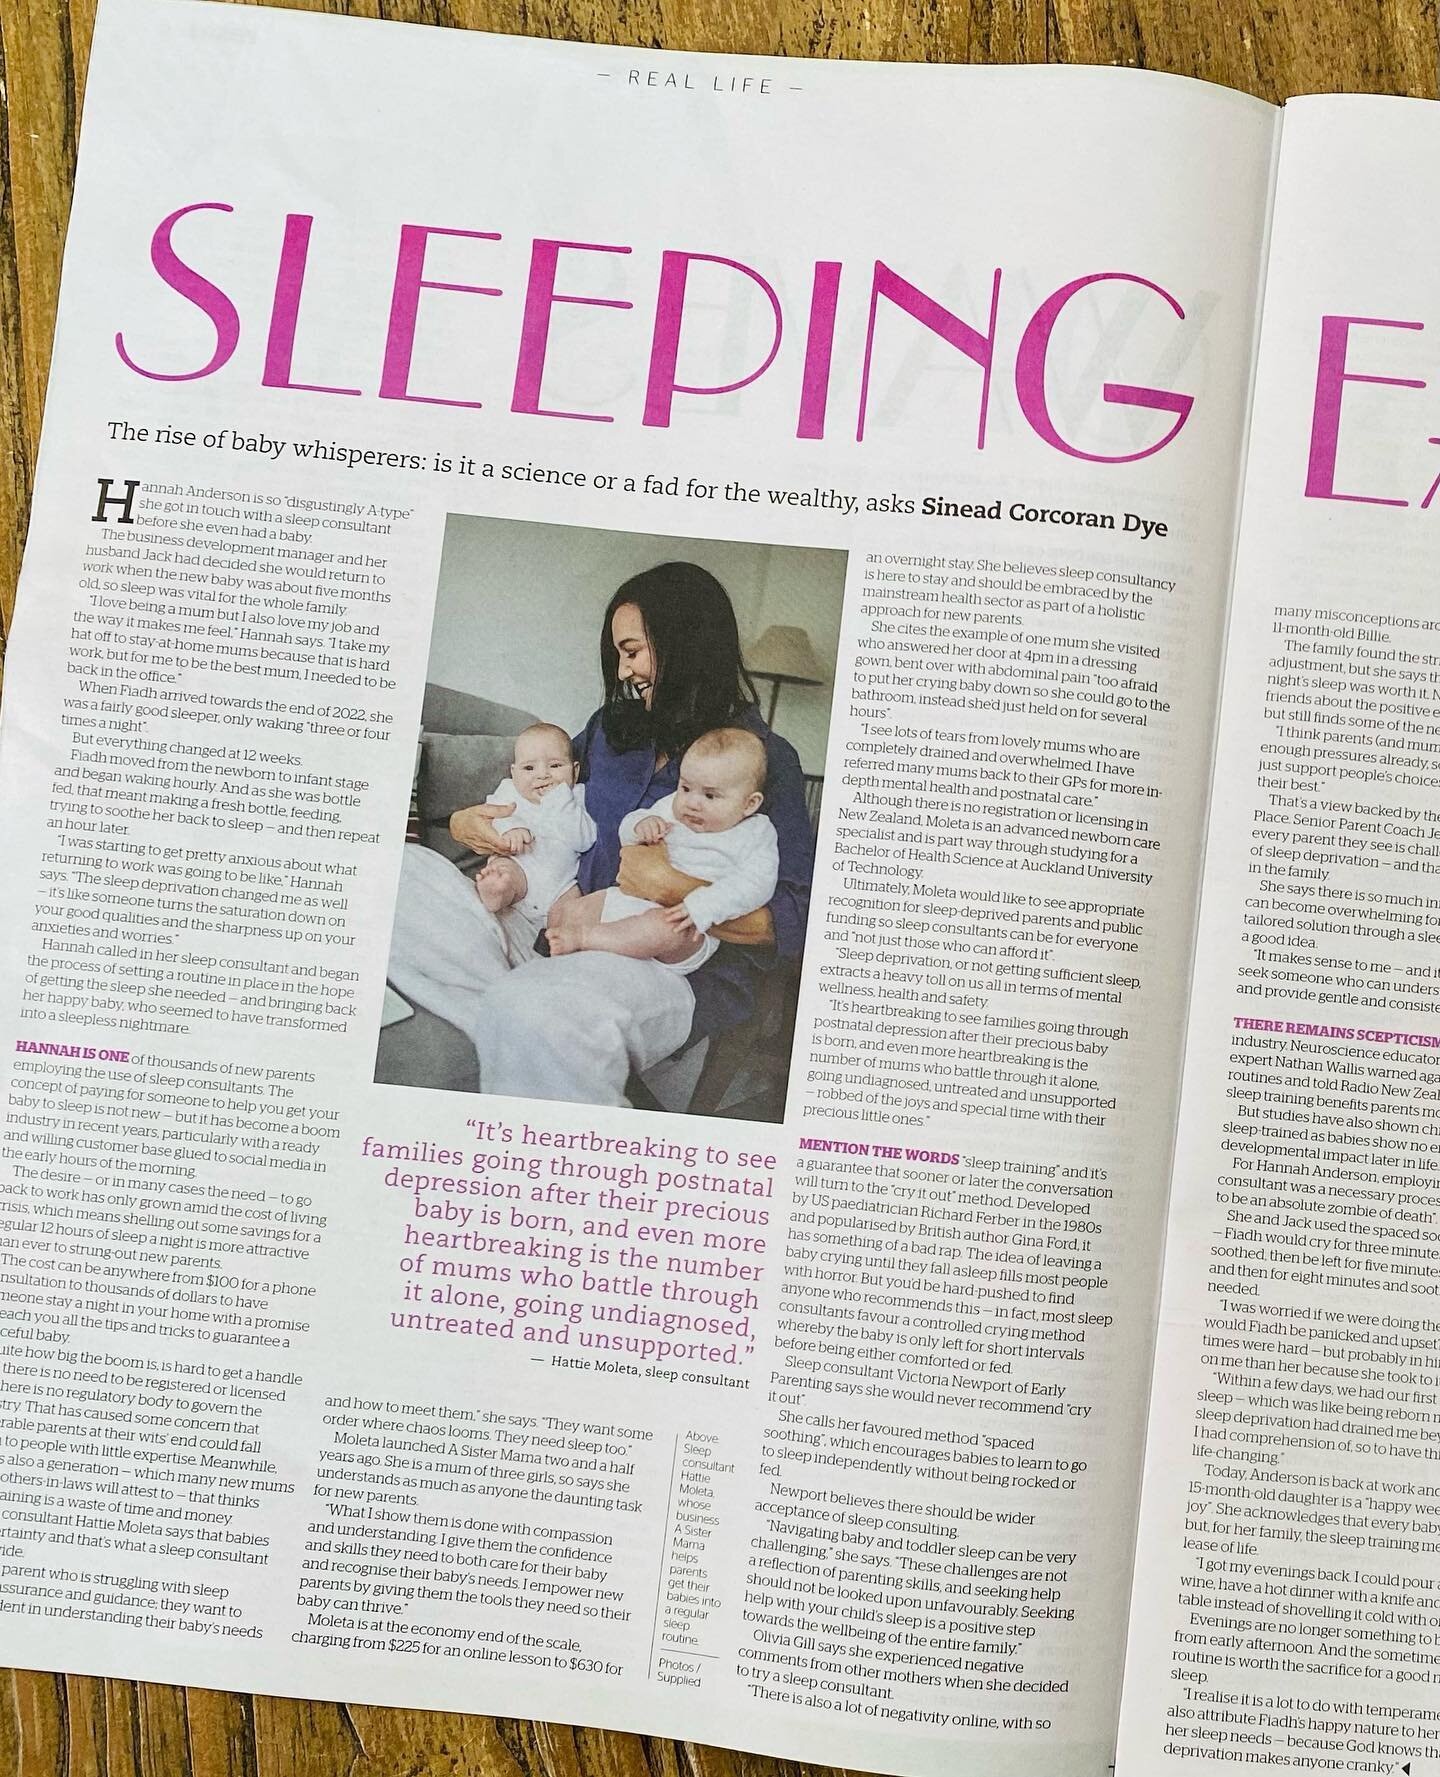 Always do what is right for you and your baby. There is no shame is asking for and receiving help. Thank you @sineadcorcoran.dye for shining a bright light on the overall wellbeing of the whole family 🤍 xx 🗞️ @nzherald